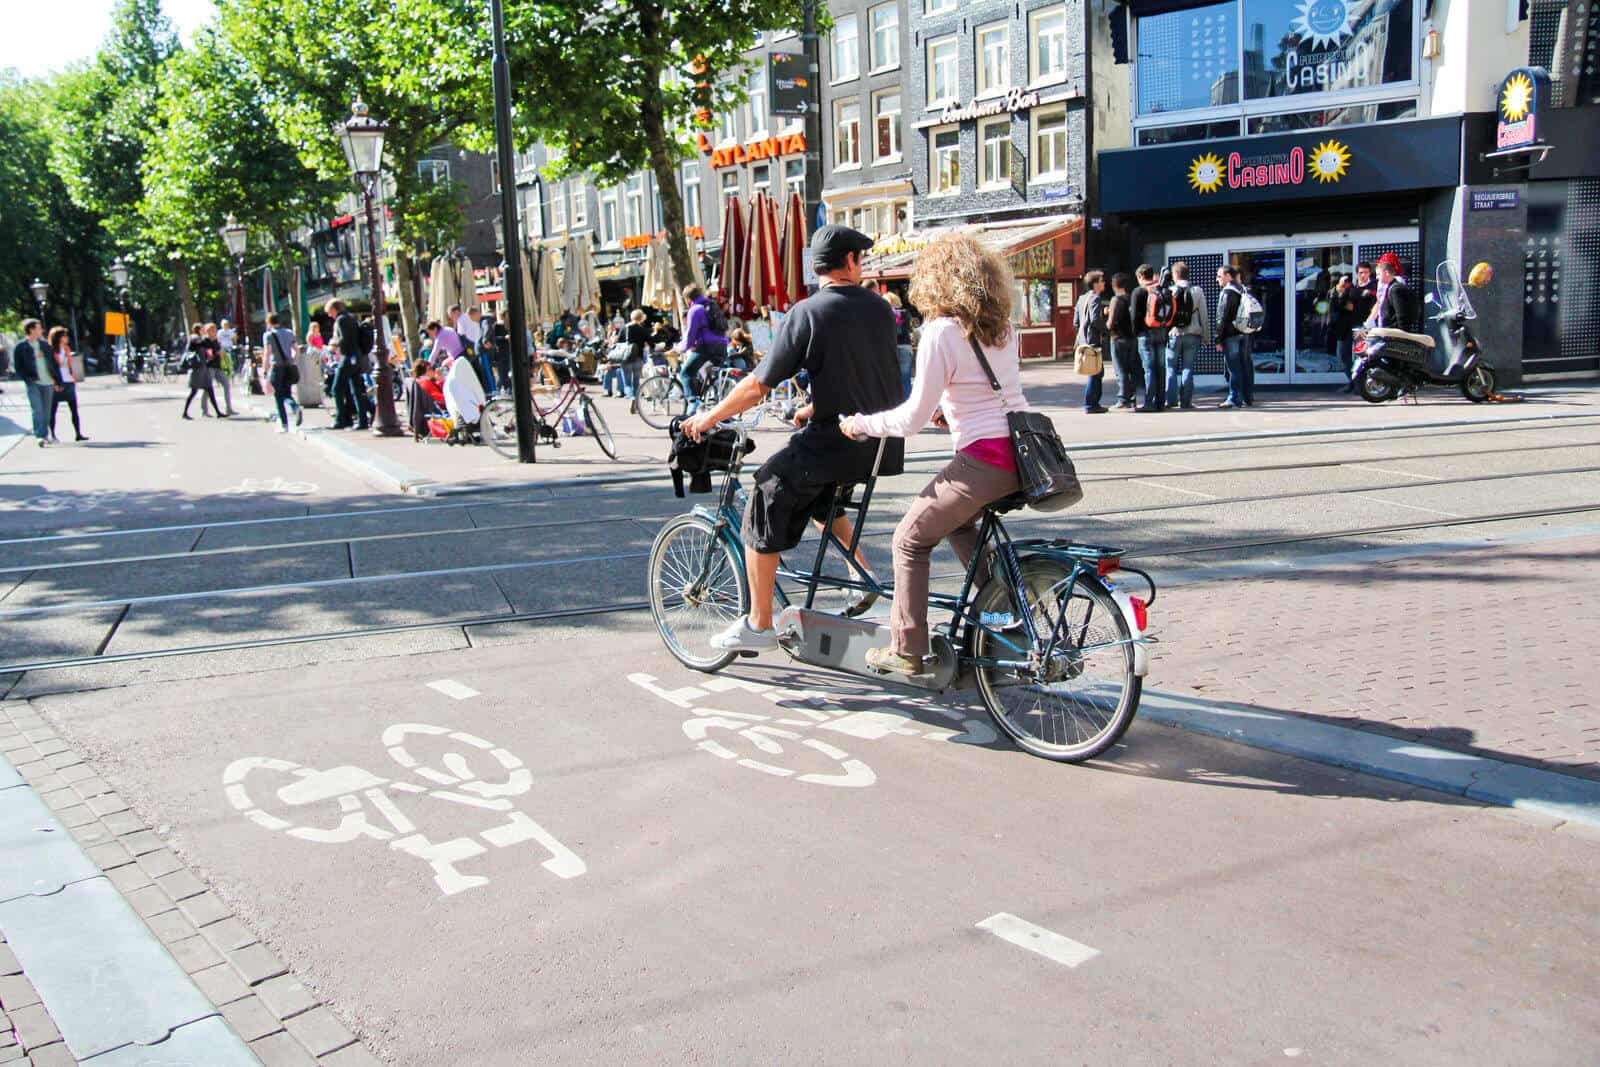 Bike lane in Amsterdam - Amsterdam Travel Tips - Amsterdam Dos and Don'ts